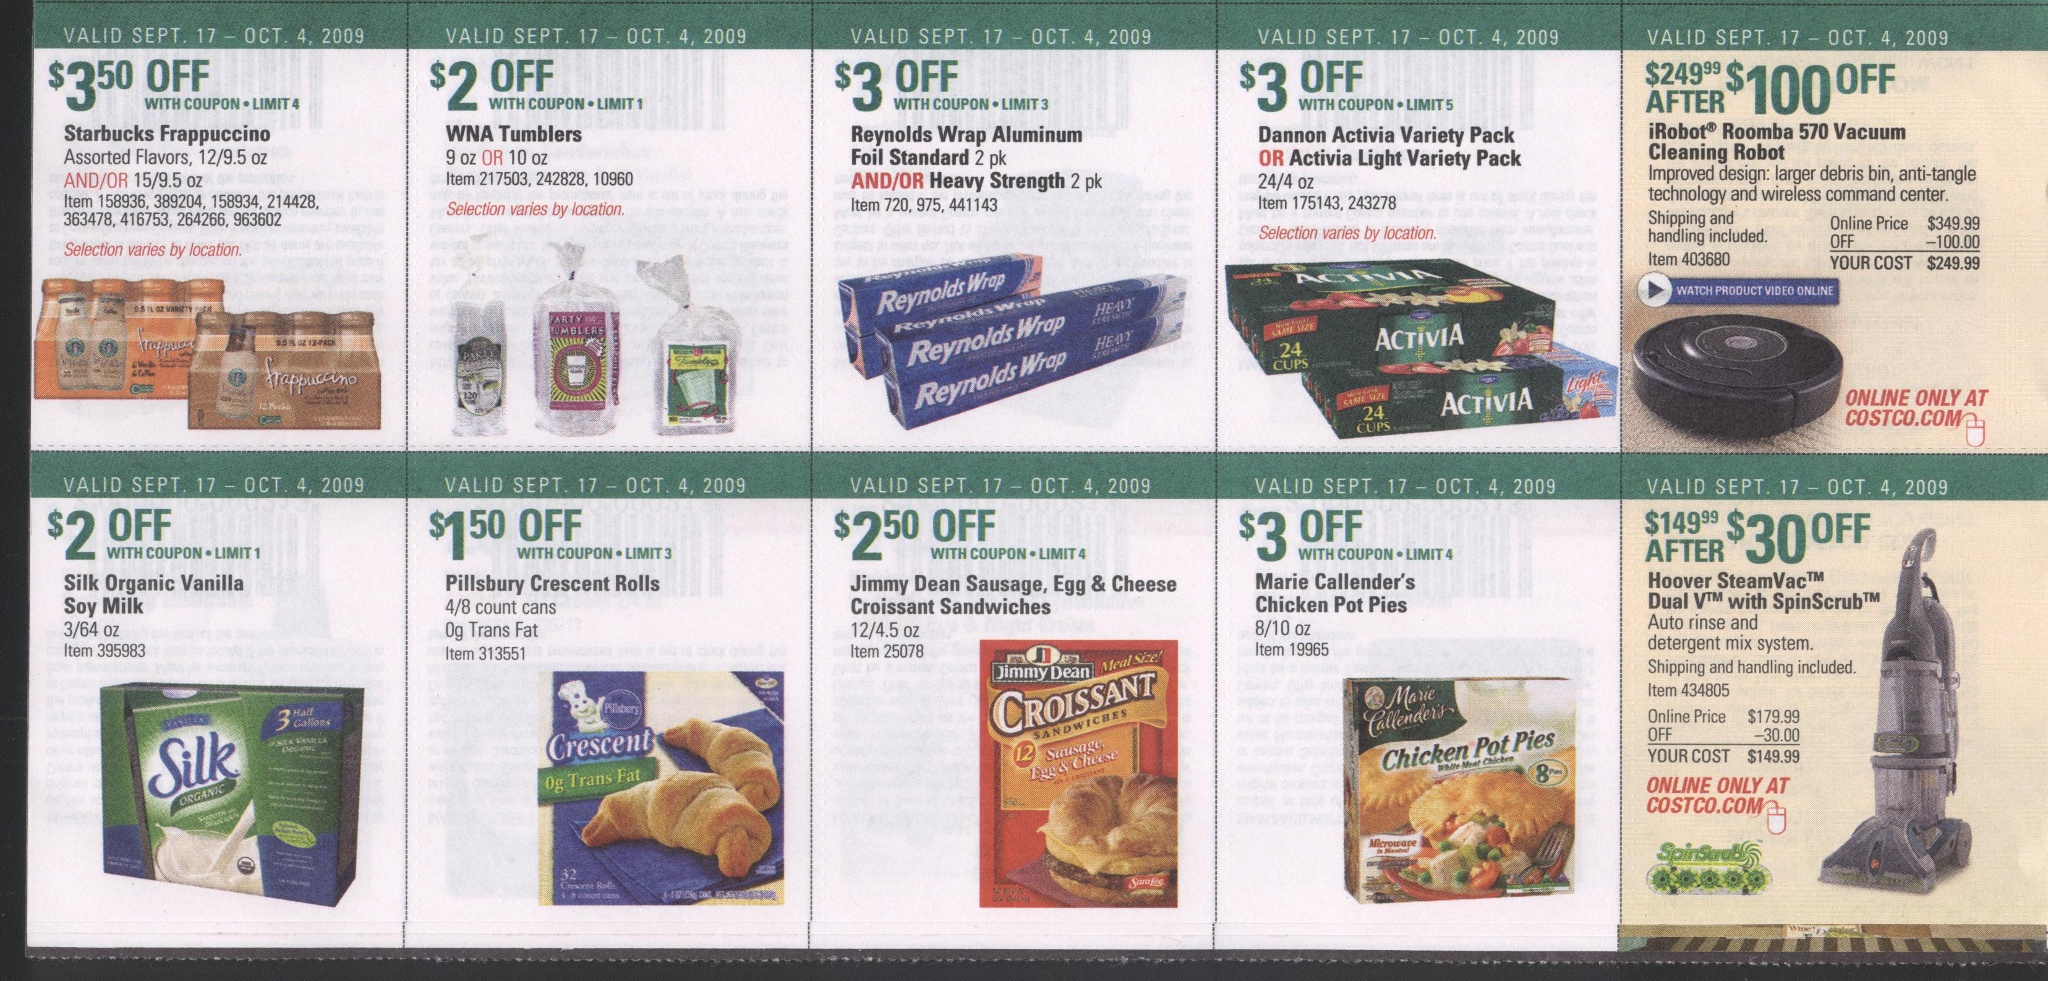 Full image coupon book page ->5<-